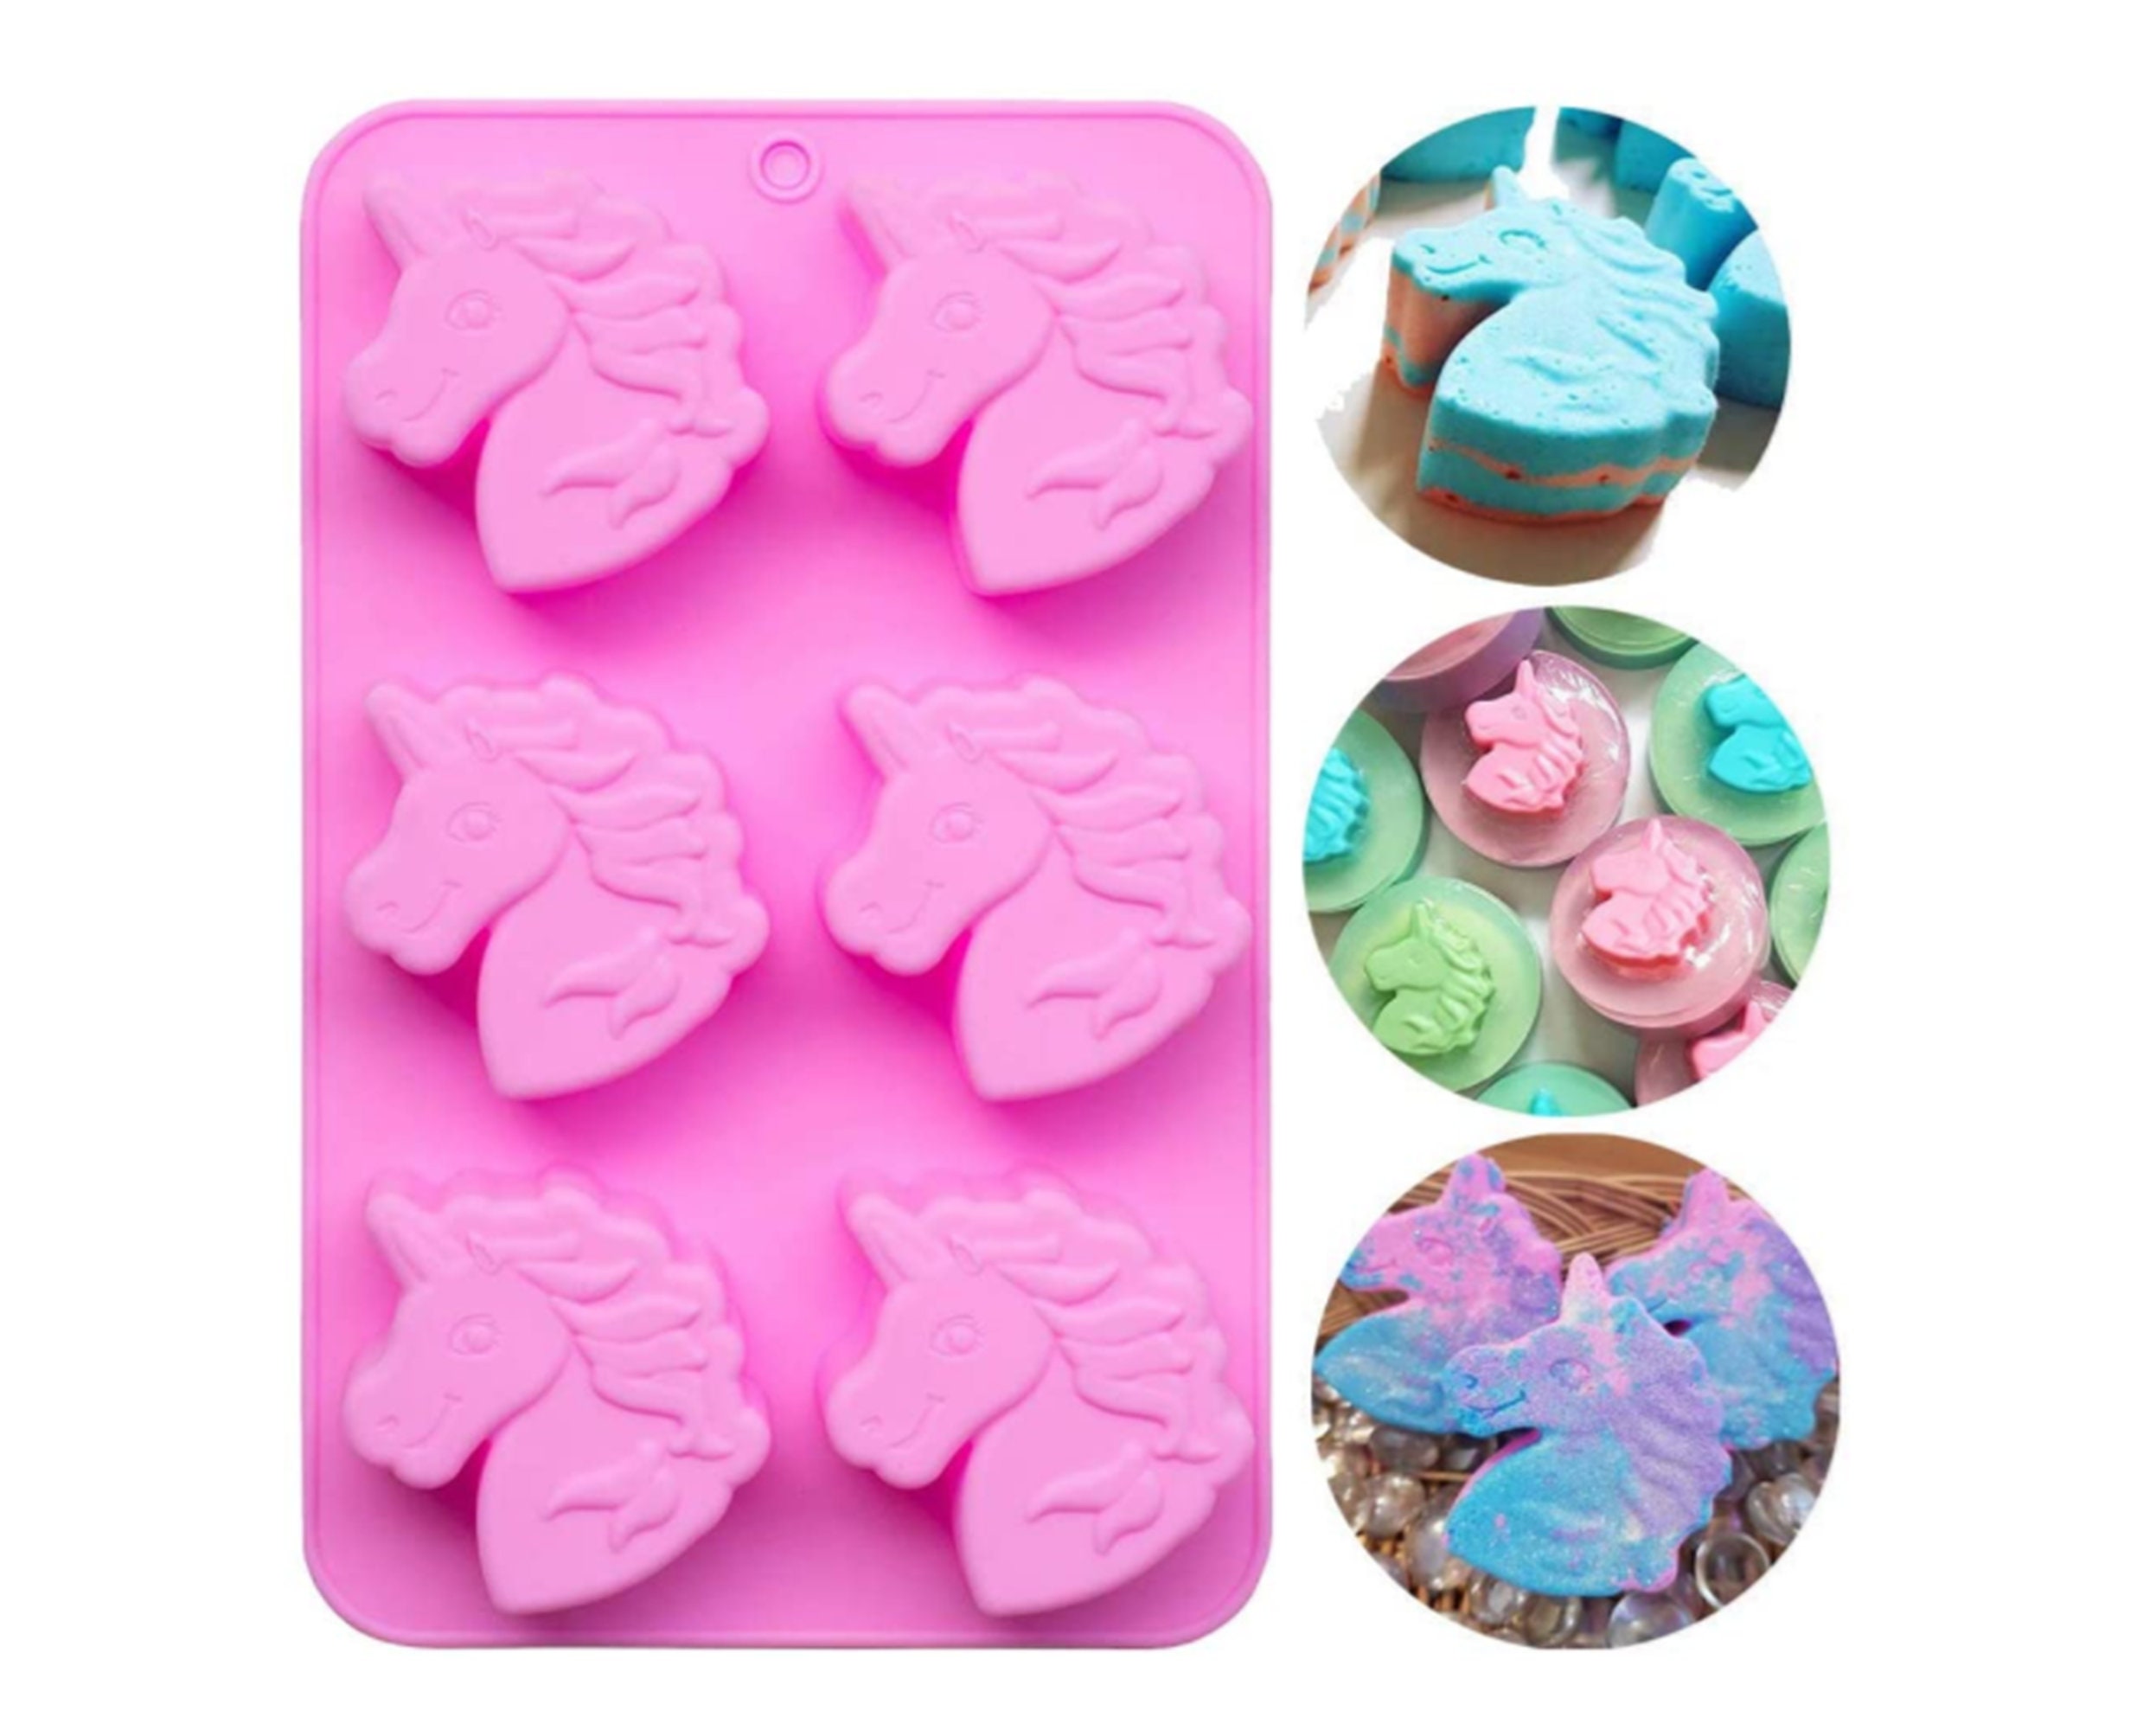 3D Square Soap Moulds Love Heart Design Silicone Mold DIY Silicone Mold for  Soap Making 